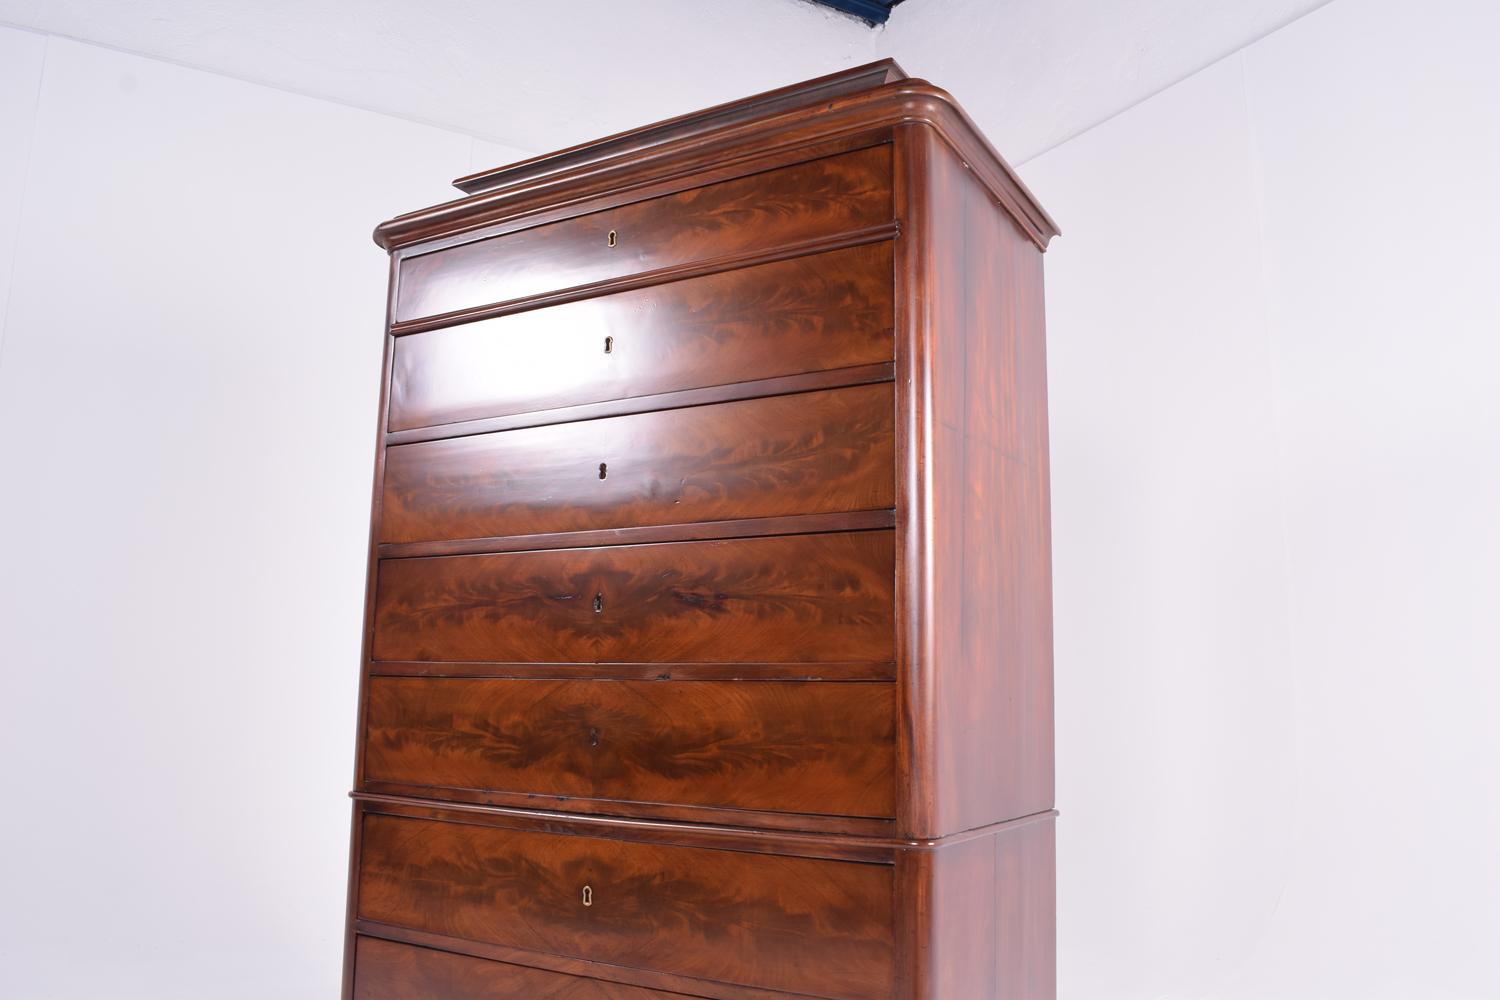 Danish Mid-19th Century Biedermeier Commode Tall Chest of Drawers 6